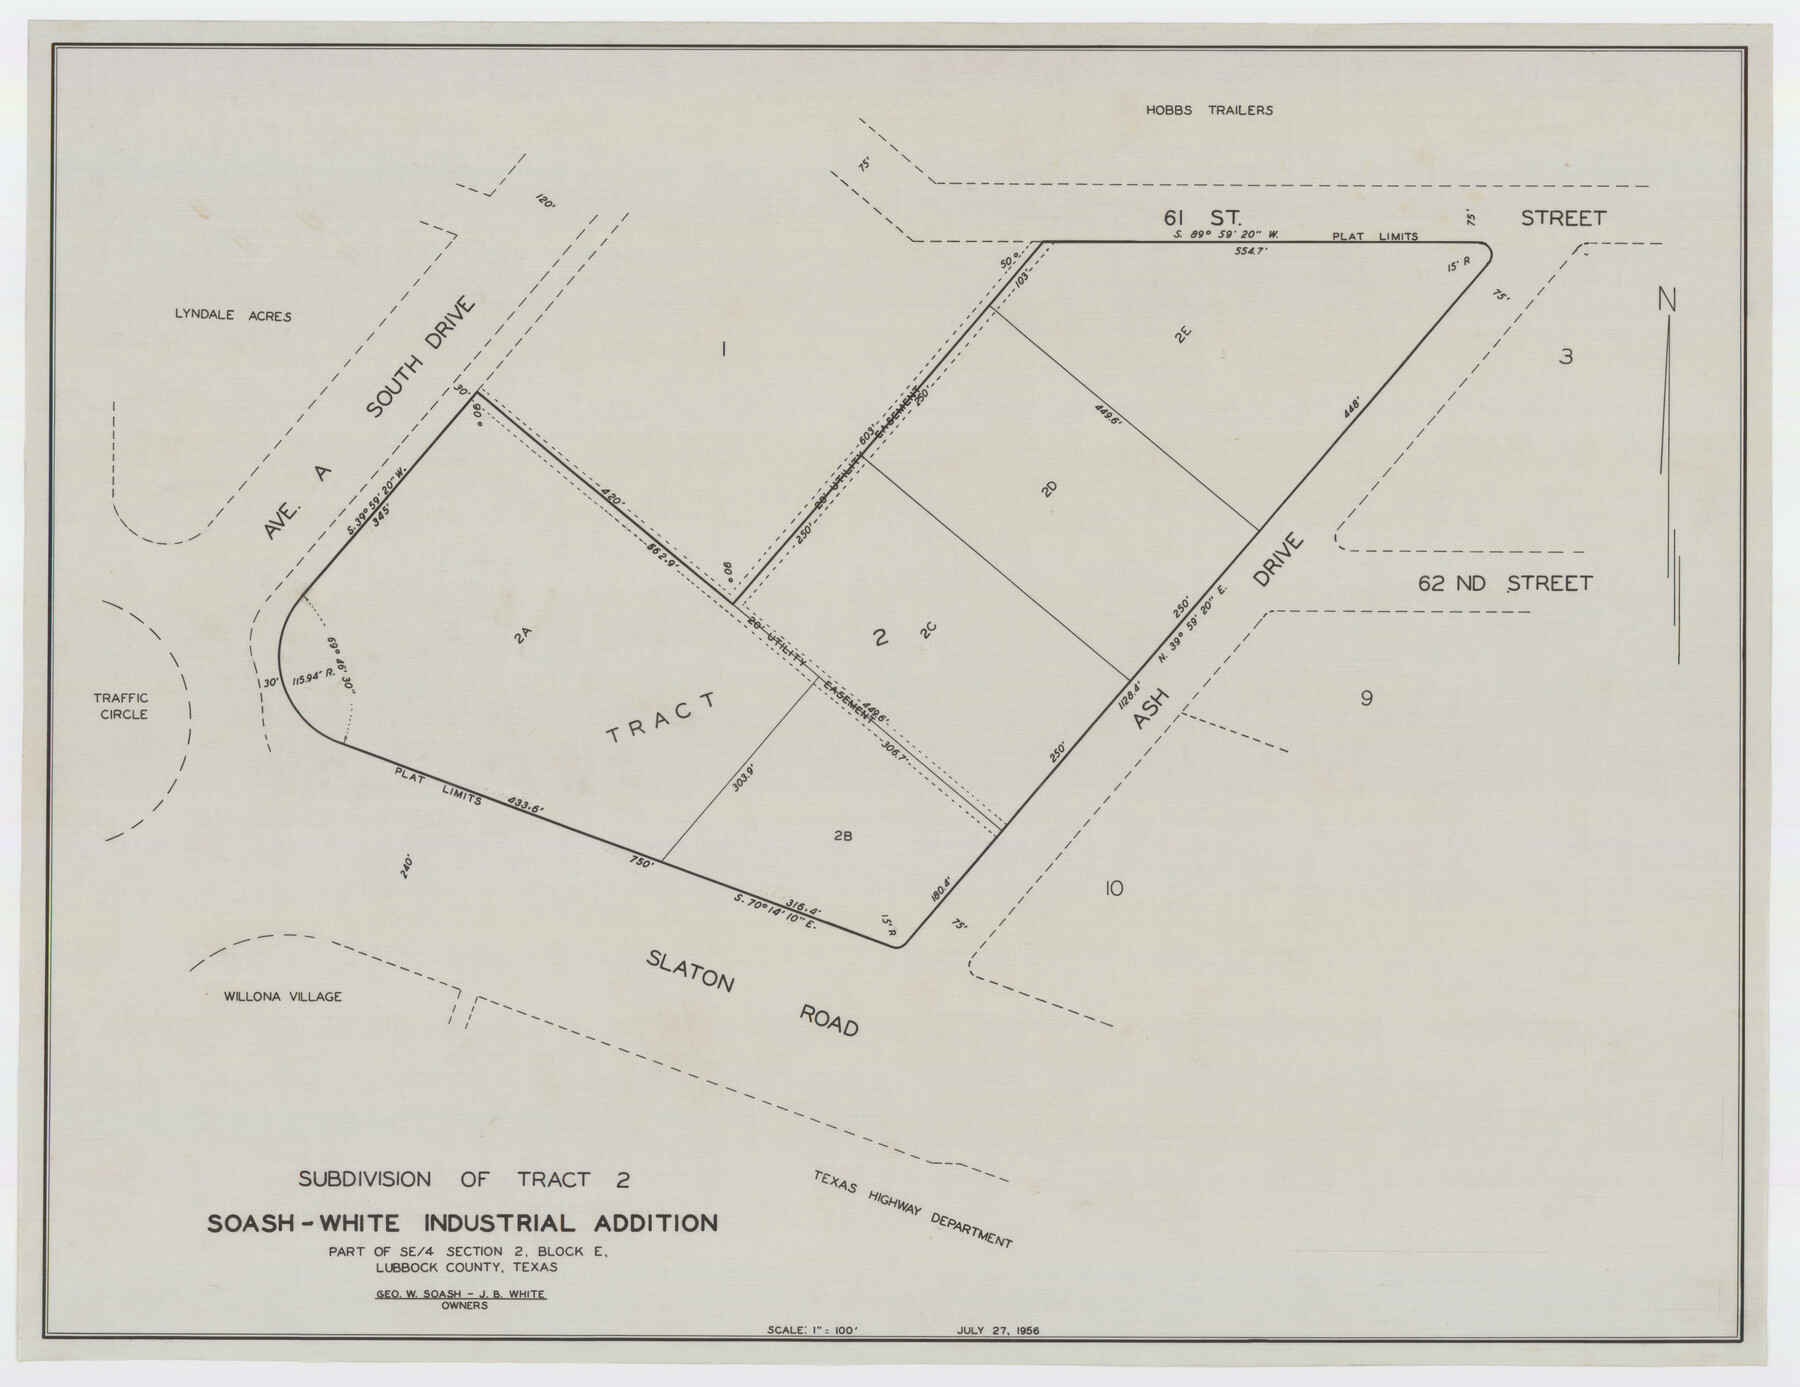 92775, Subdivision of Tract 2, Soash-White Industrial Addition, Part of Southeast Quarter, Section 2, Block E (Geo. W. Soash - J. B. White, Owners), Twichell Survey Records